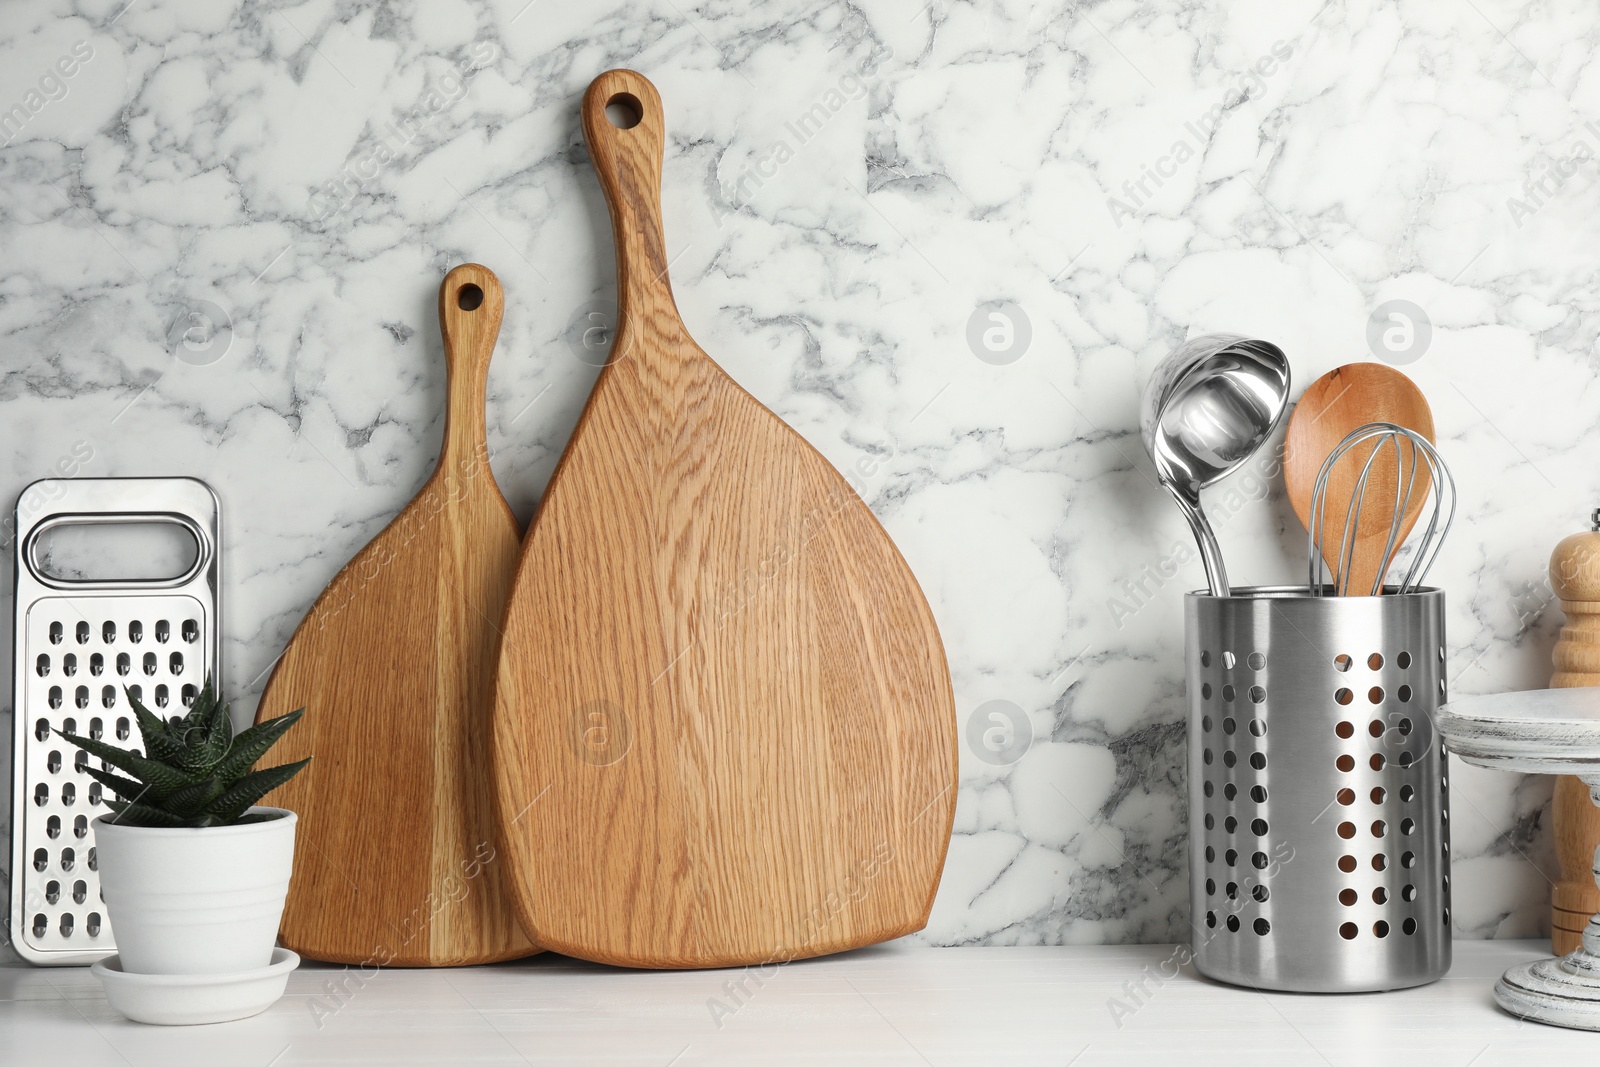 Photo of Wooden cutting boards, kitchen utensils and houseplant on white table near marble wall